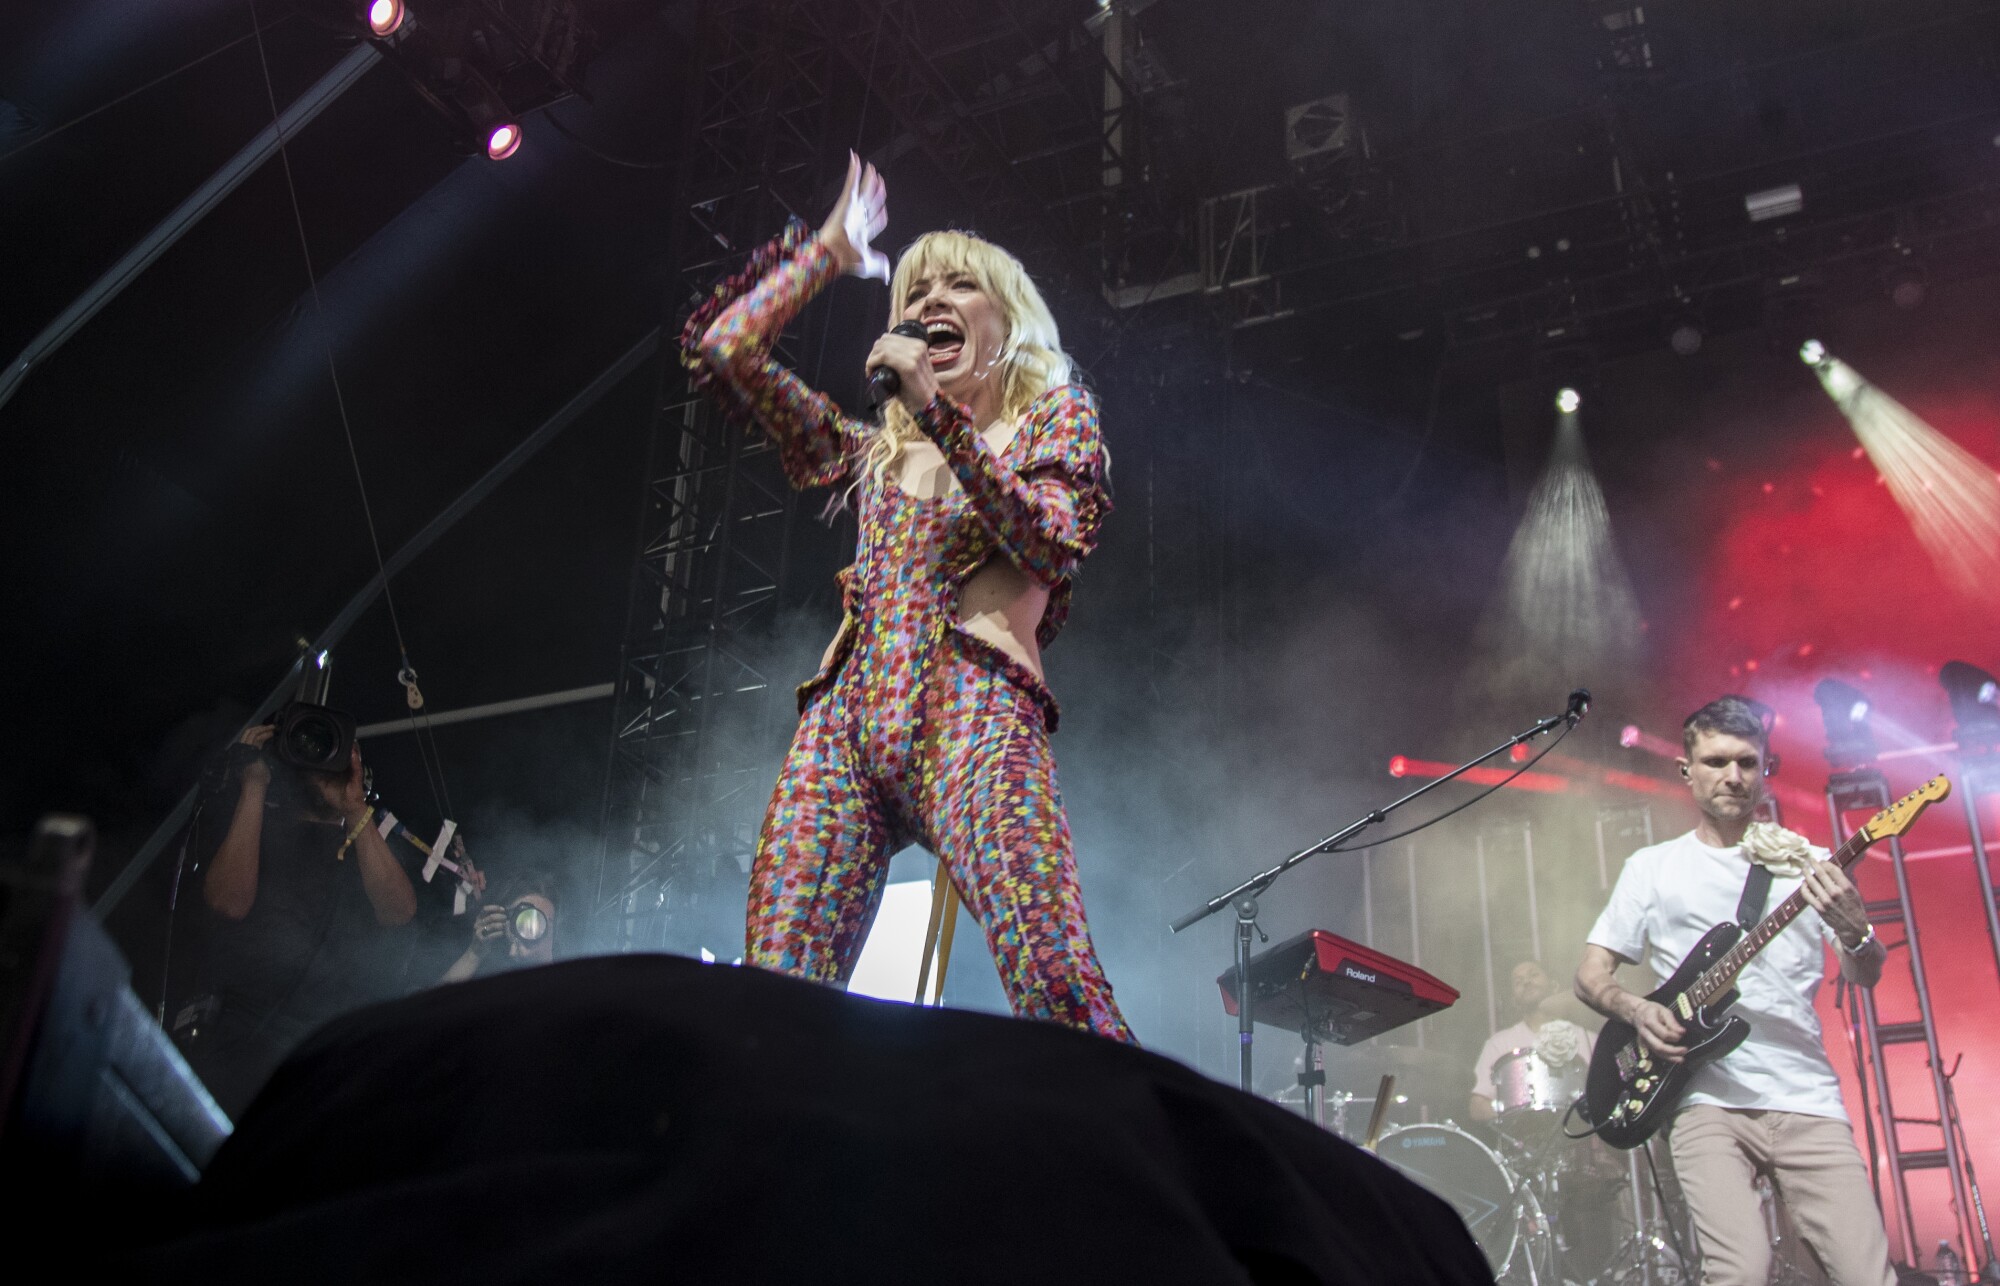 Carly Rae Jepsen in a multicolored outfit performs with bandmates on stage.